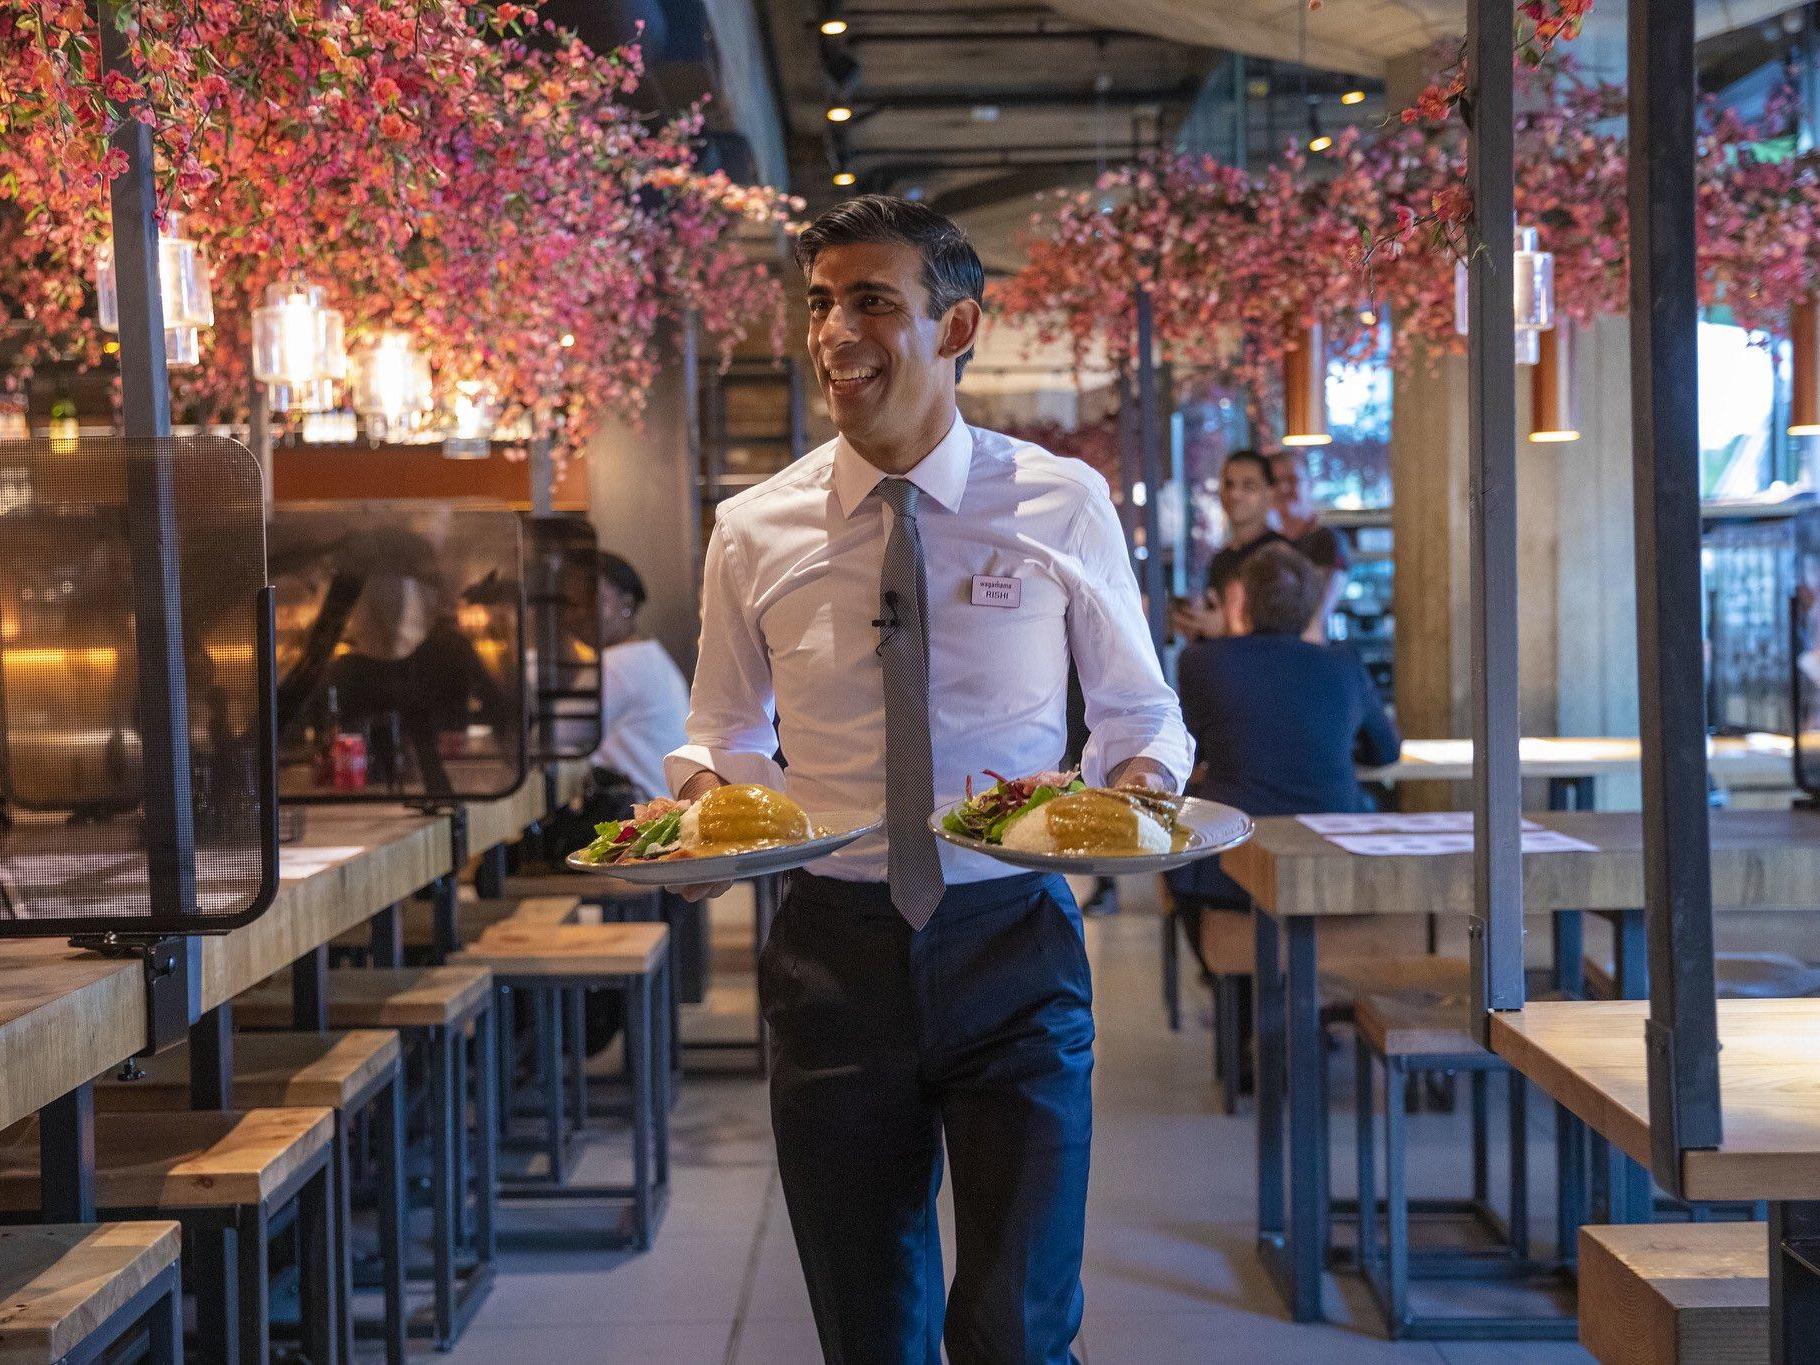 Chancellor Rishi Sunak serves food to customers in Wagamama, after announcing meal discounts for restaurant patrons in a bid to help the industry recover from the coronavirus crisis